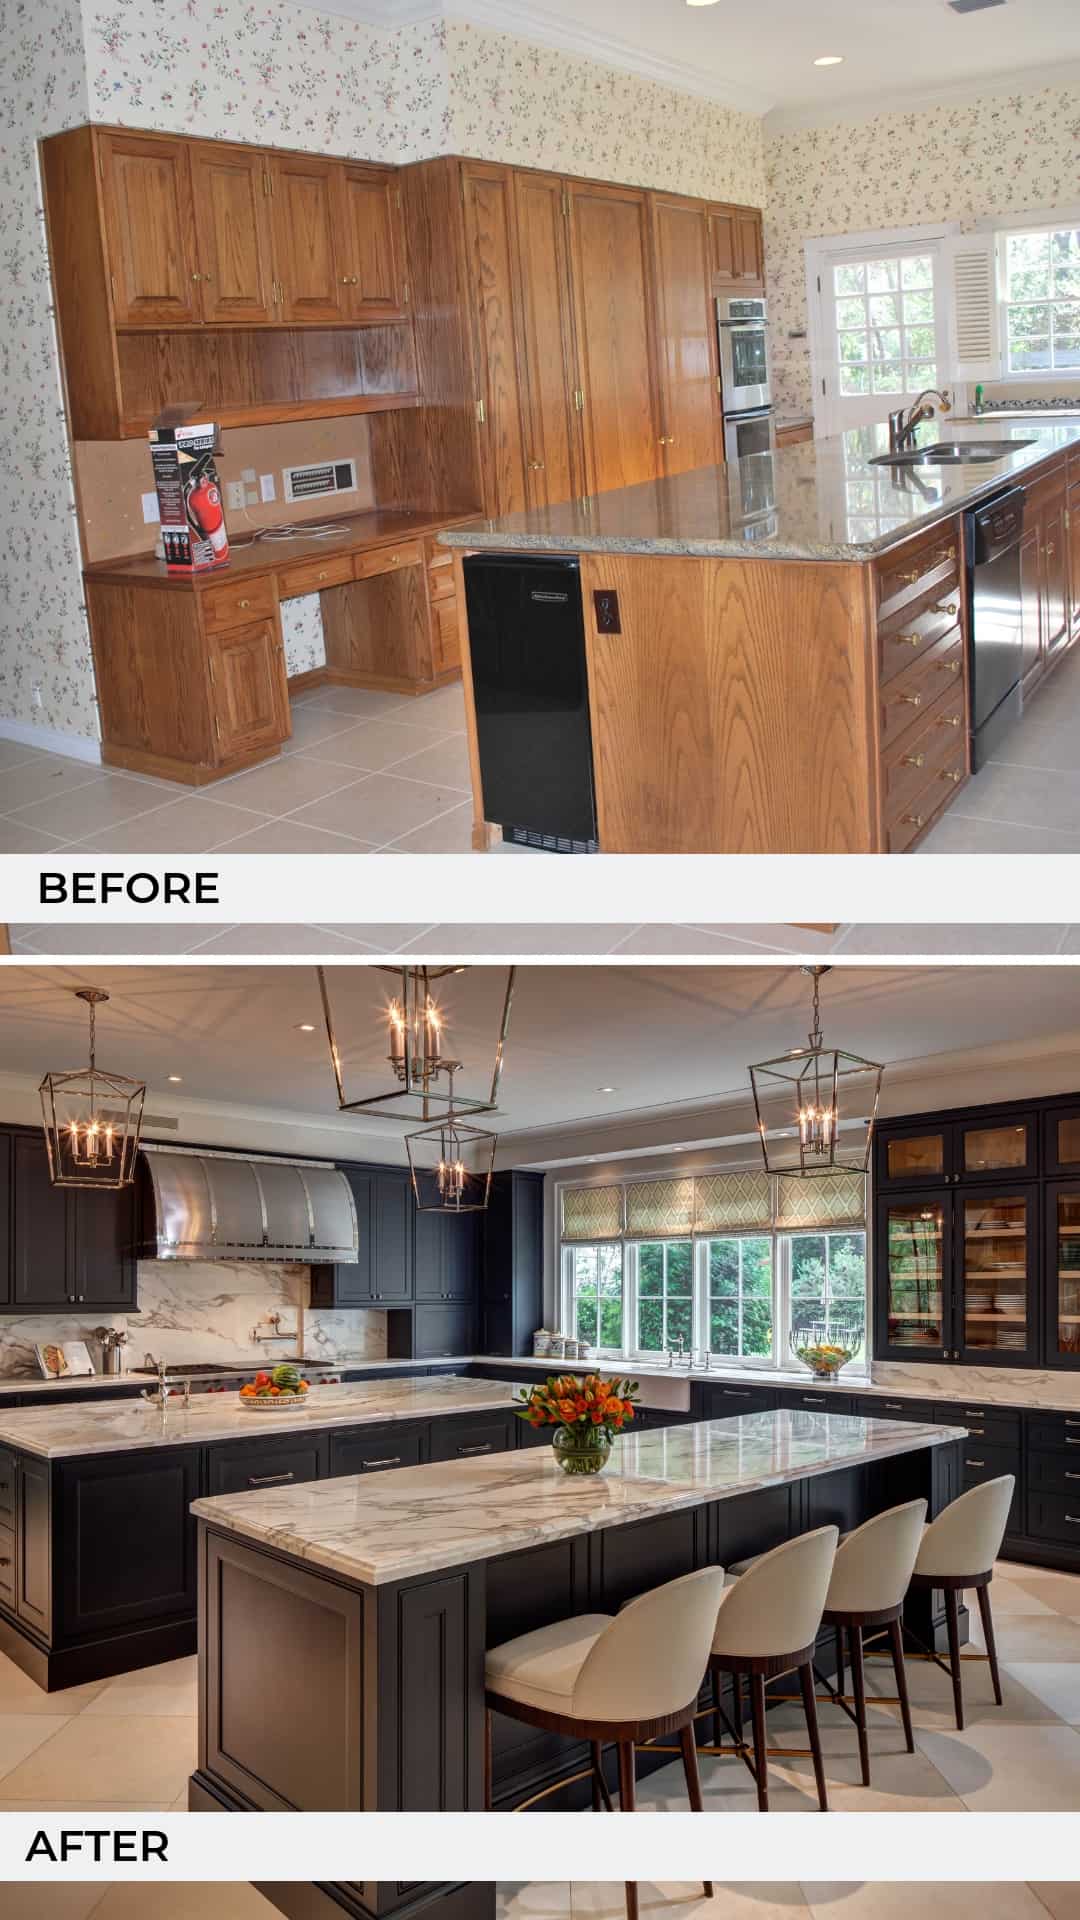 Kitchen before and after - new double islands